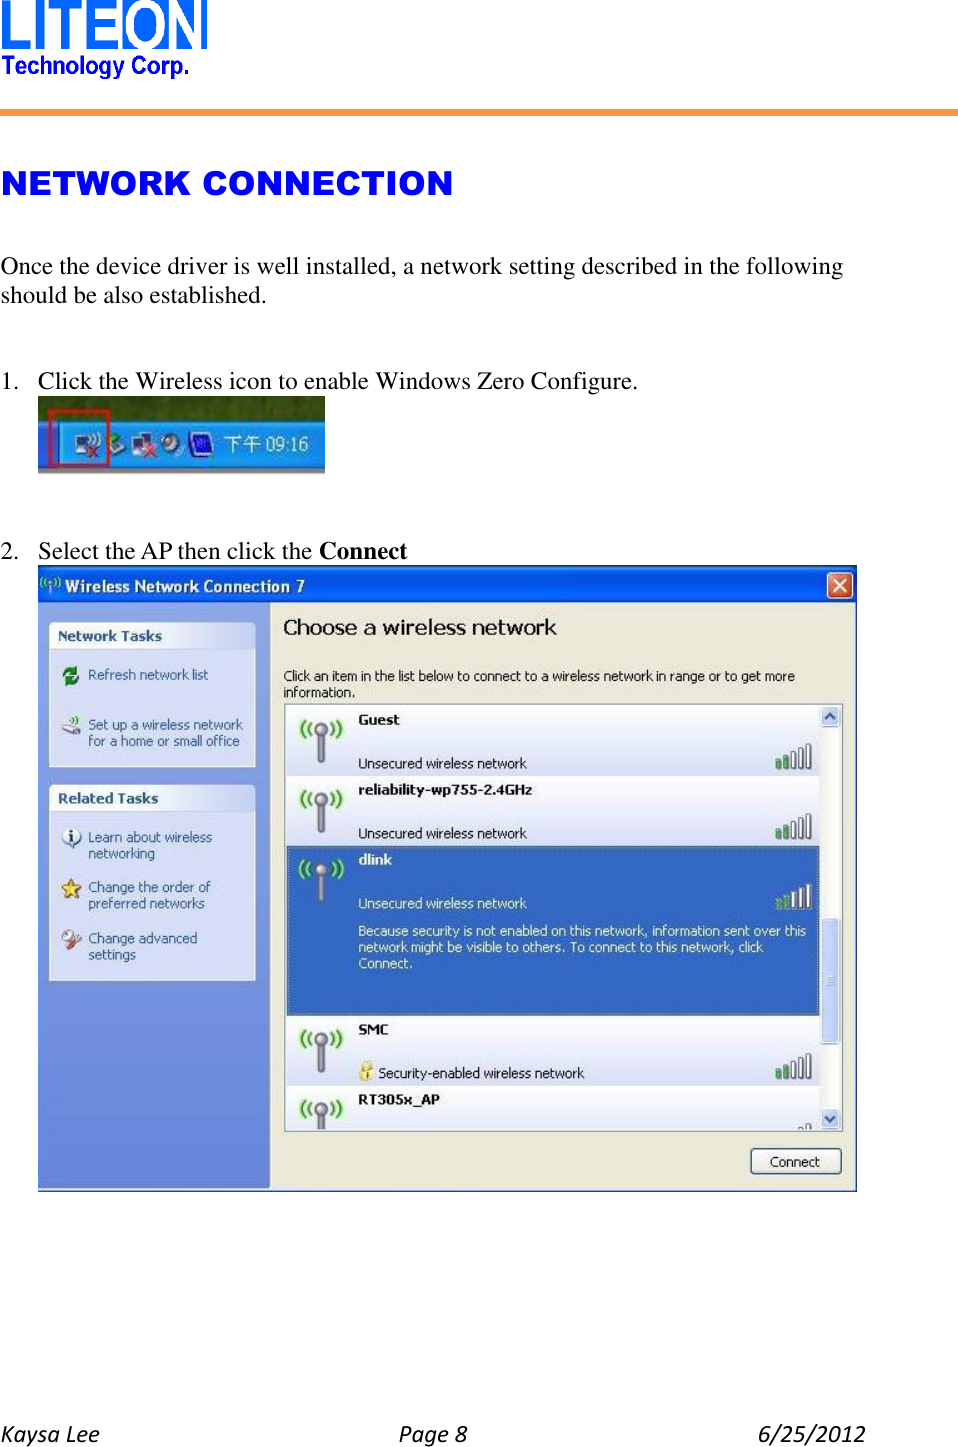   Kaysa Lee  Page 8  6/25/2012    NETWORK CONNECTION  Once the device driver is well installed, a network setting described in the following should be also established.   1. Click the Wireless icon to enable Windows Zero Configure.    2. Select the AP then click the Connect  